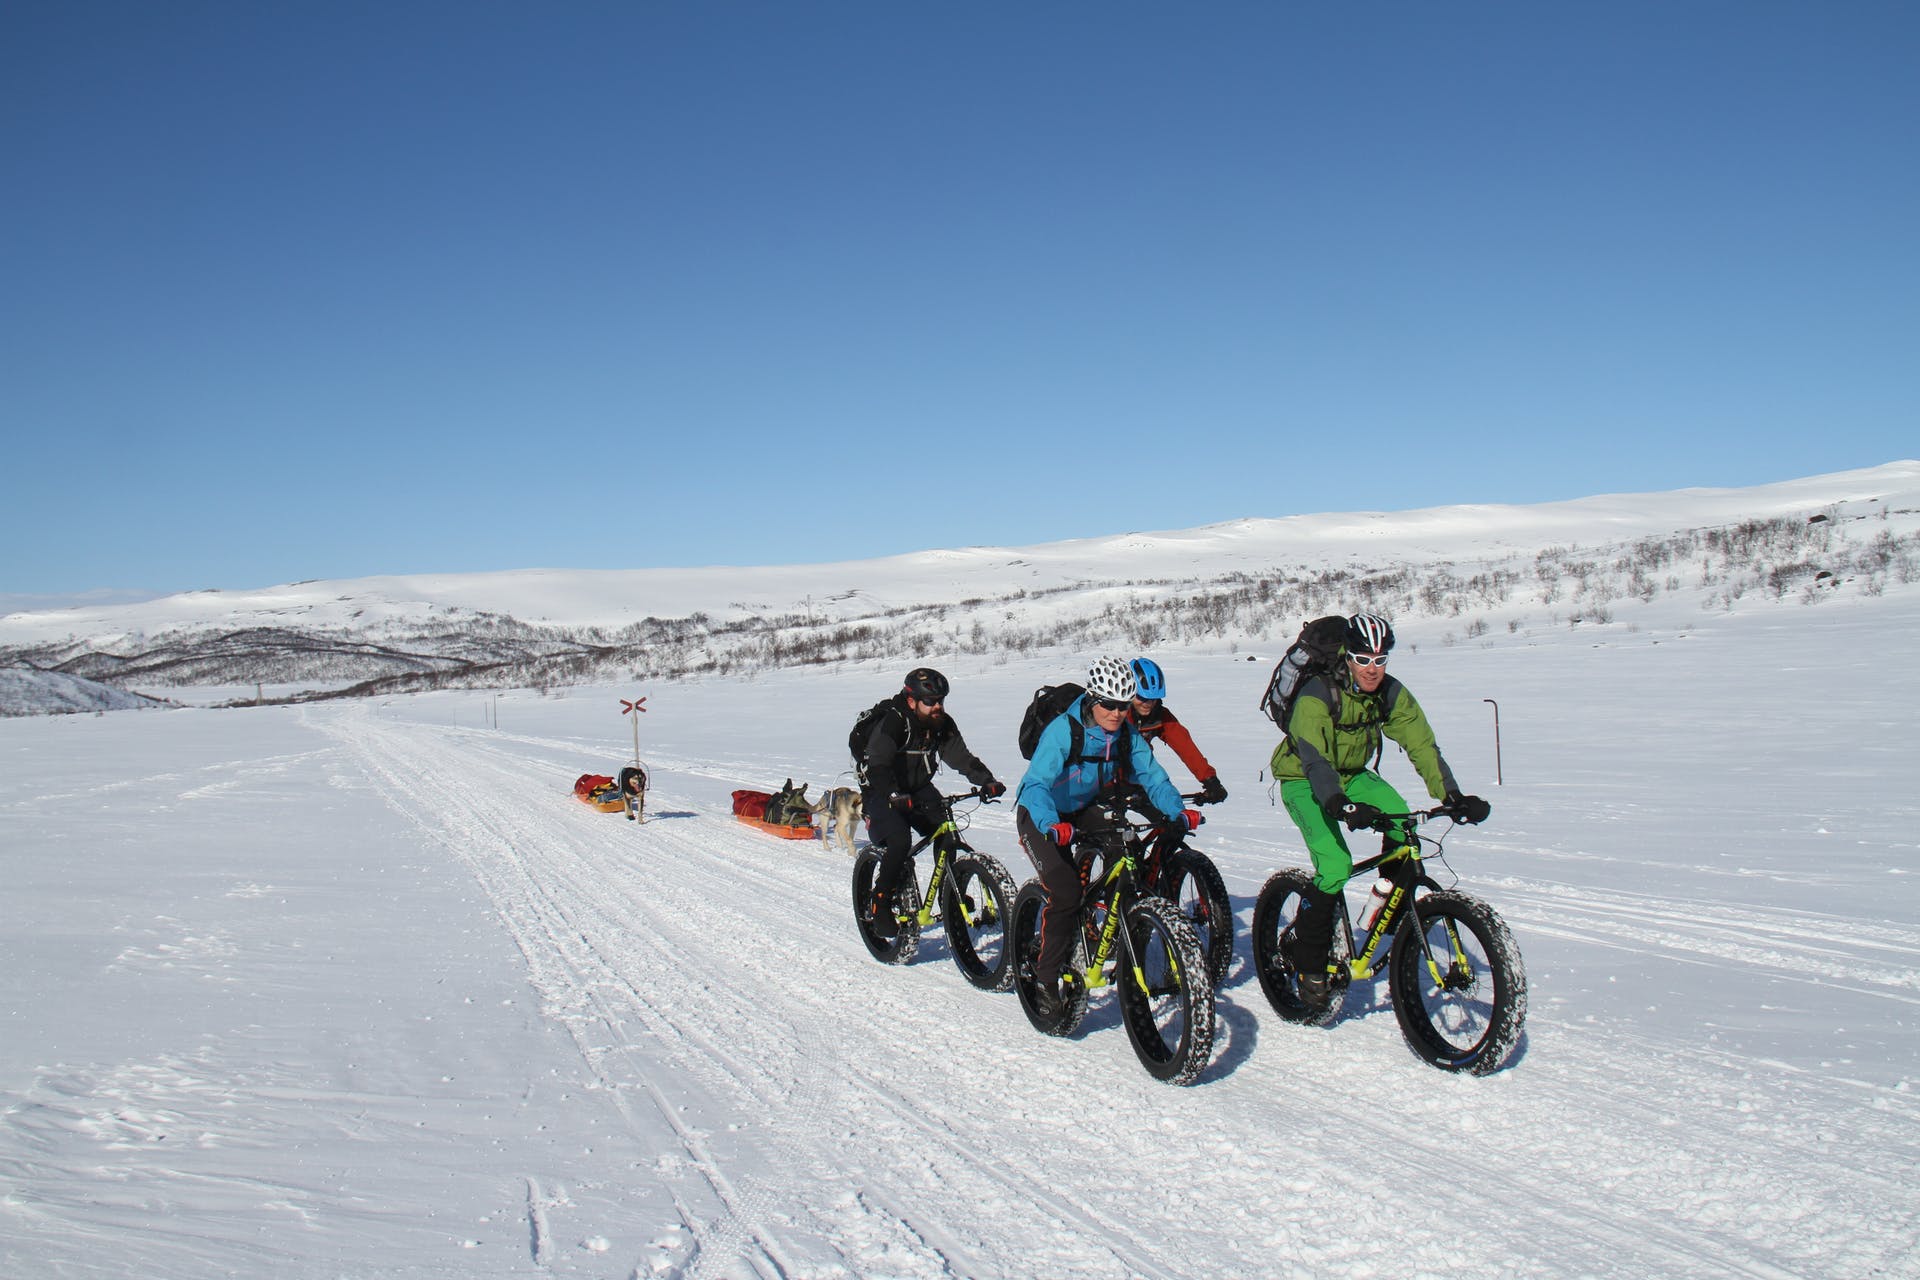 A group of tourists fat biking in the Arctic, with dogs pulling sleds behind them.